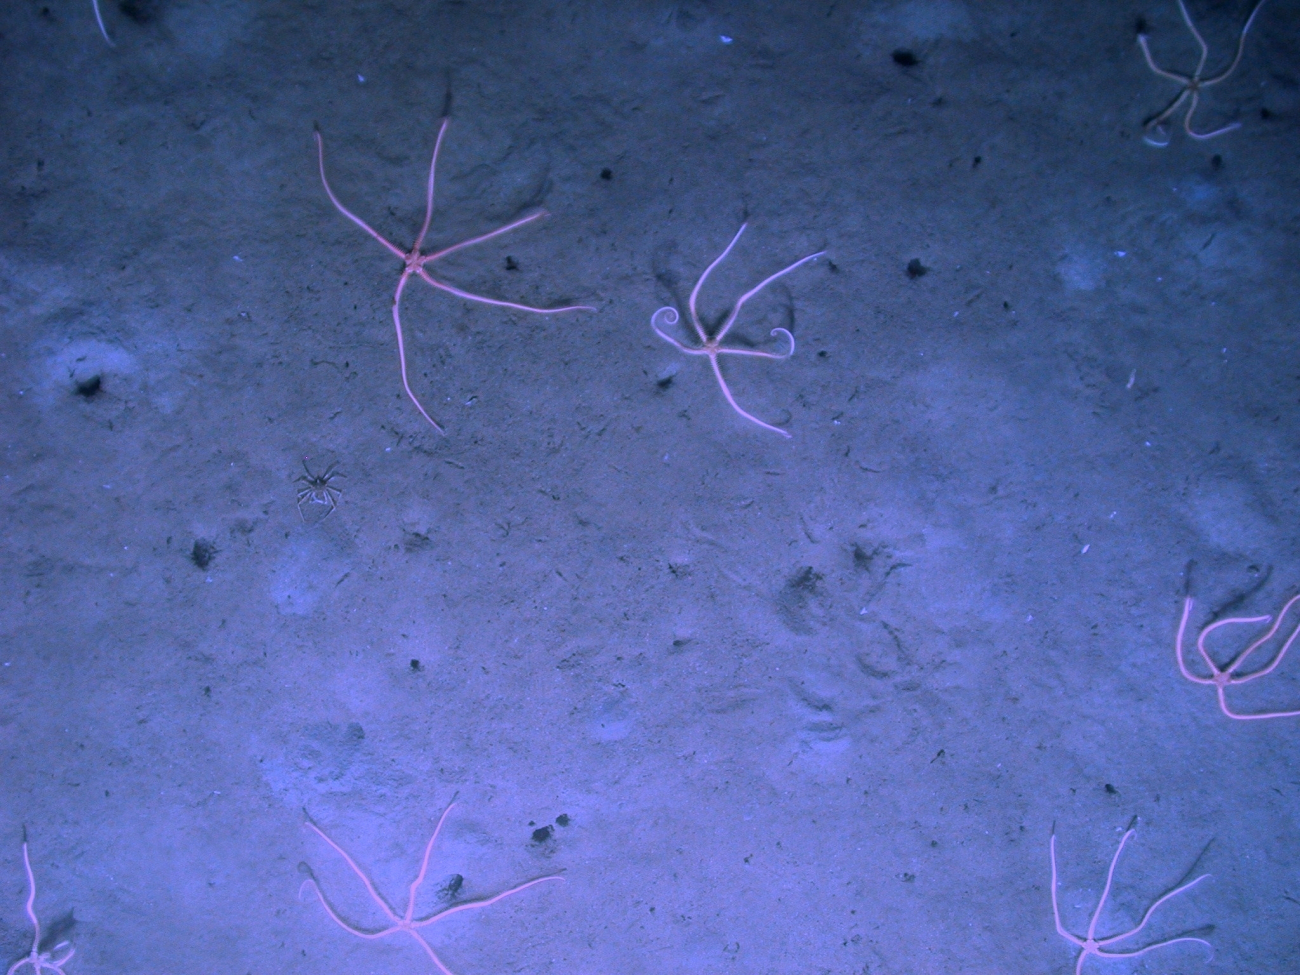 A small lithodid crab and a herd of white brittle stars